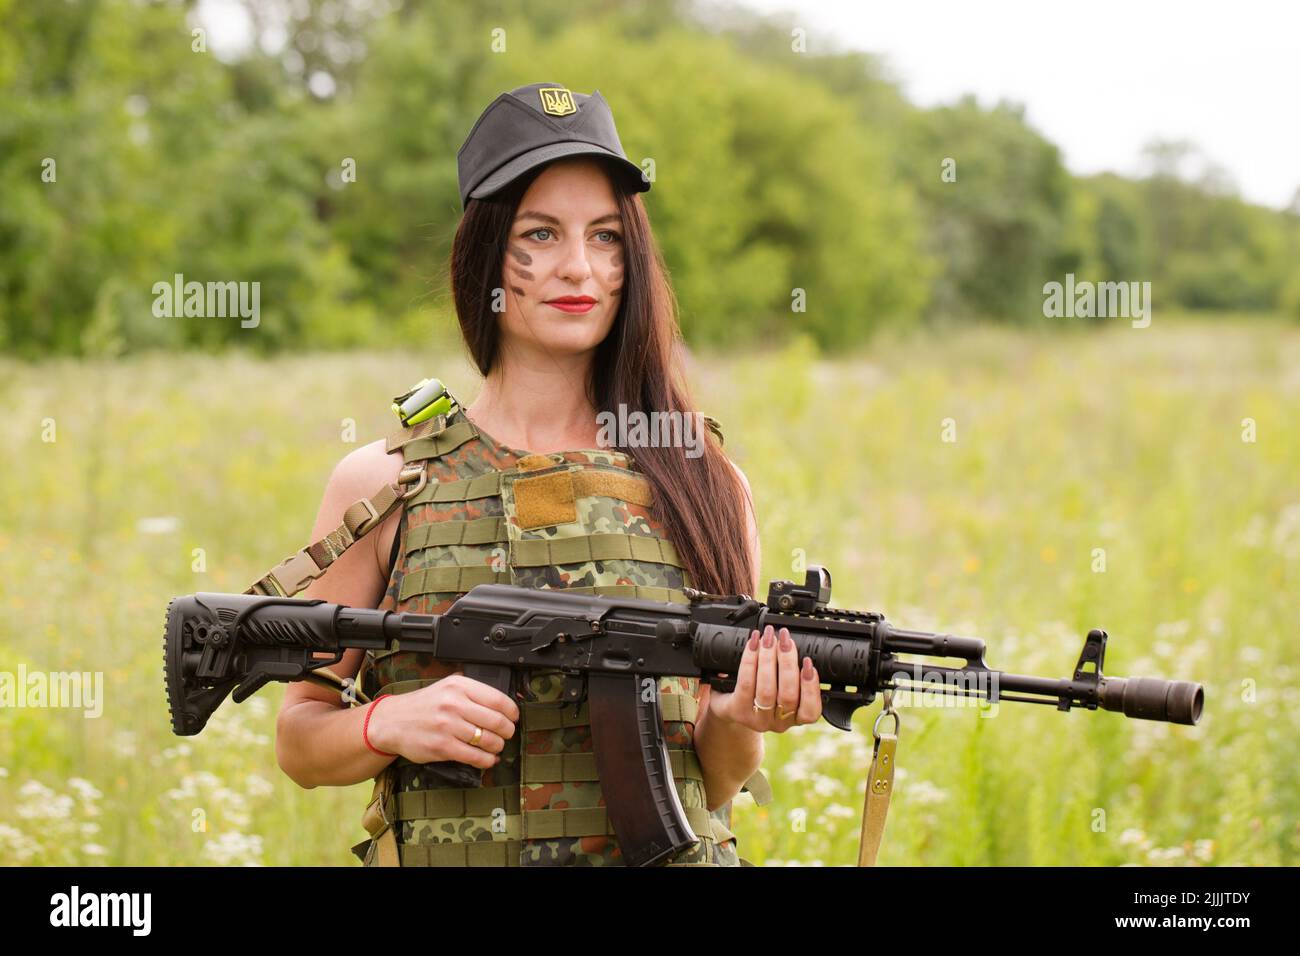 Ukrainian female military servicewoman with a machine gun in her hands in the middle of a field Stock Photo